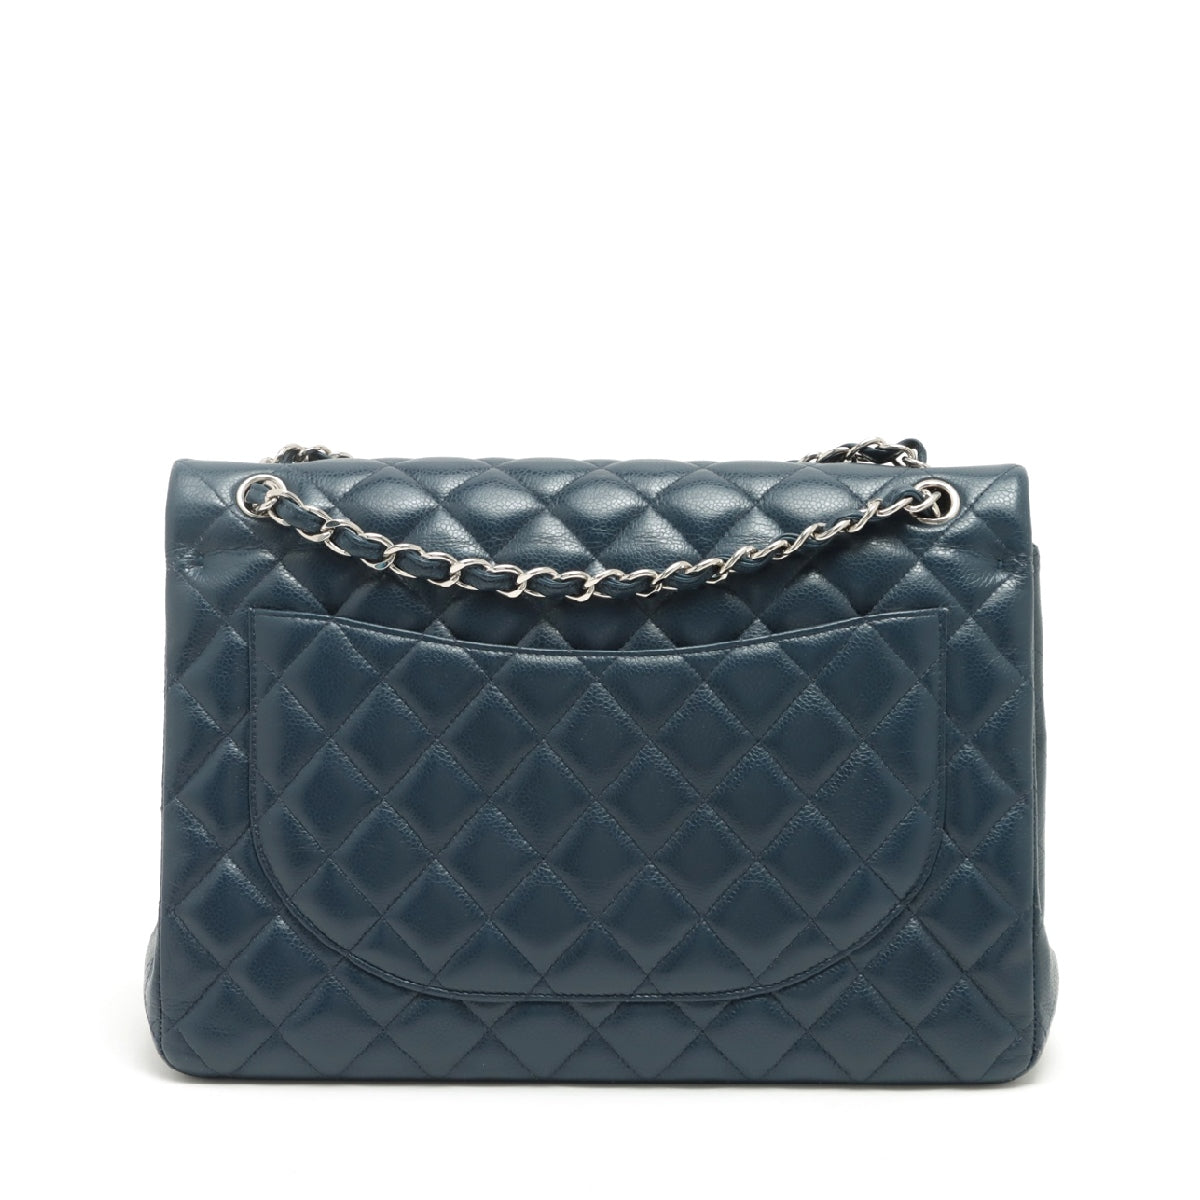 Chanel Big Matelasse Caviarskin Double flap Double chain bag Blue Silver Metal fittings 15XXXXXX